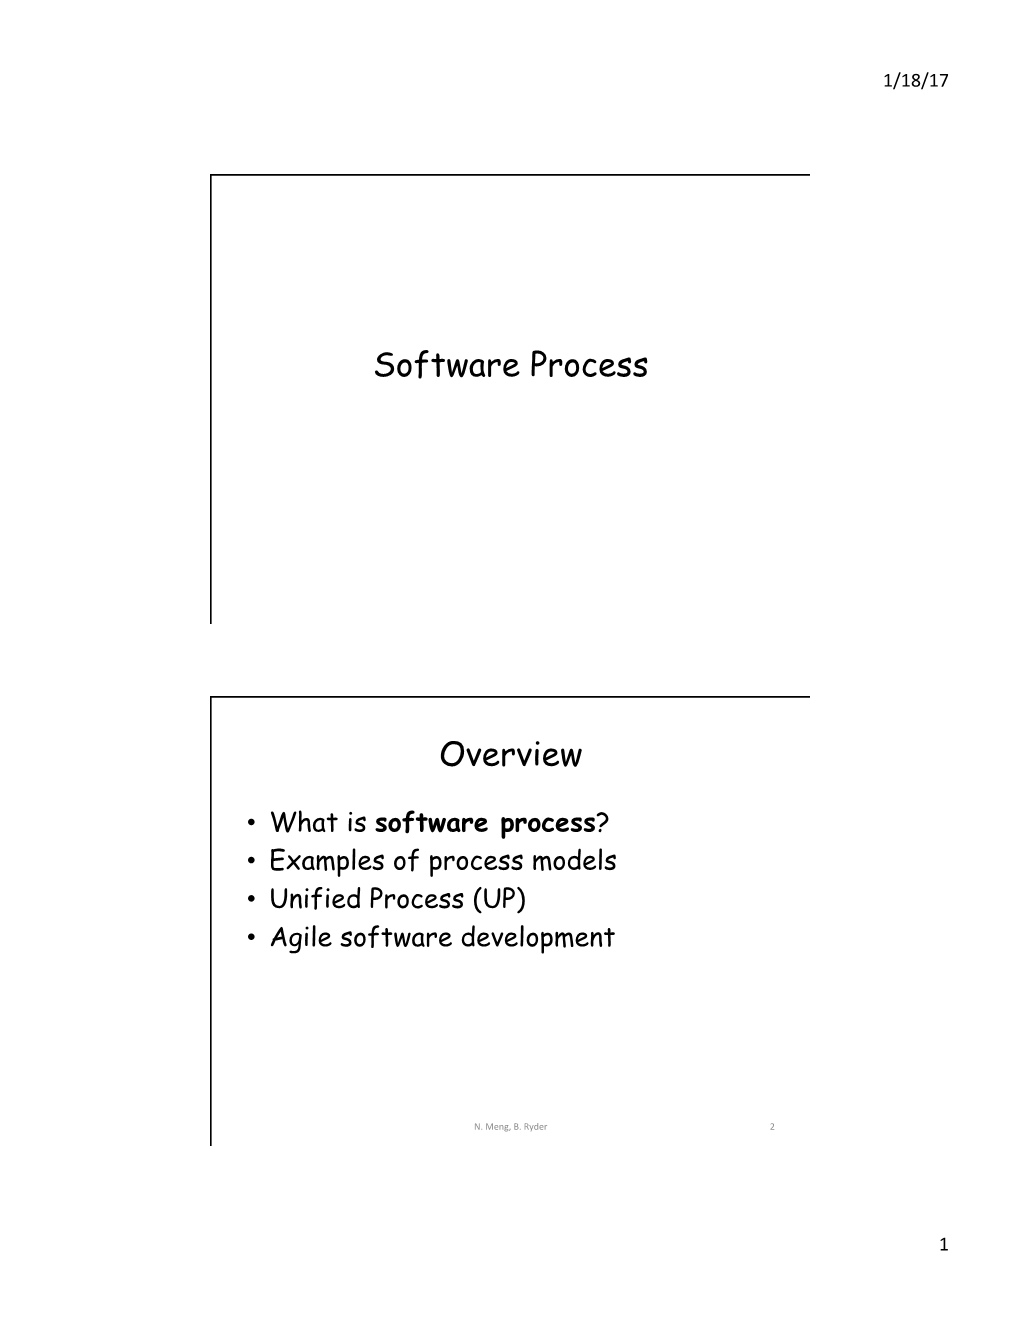 Software Process Overview